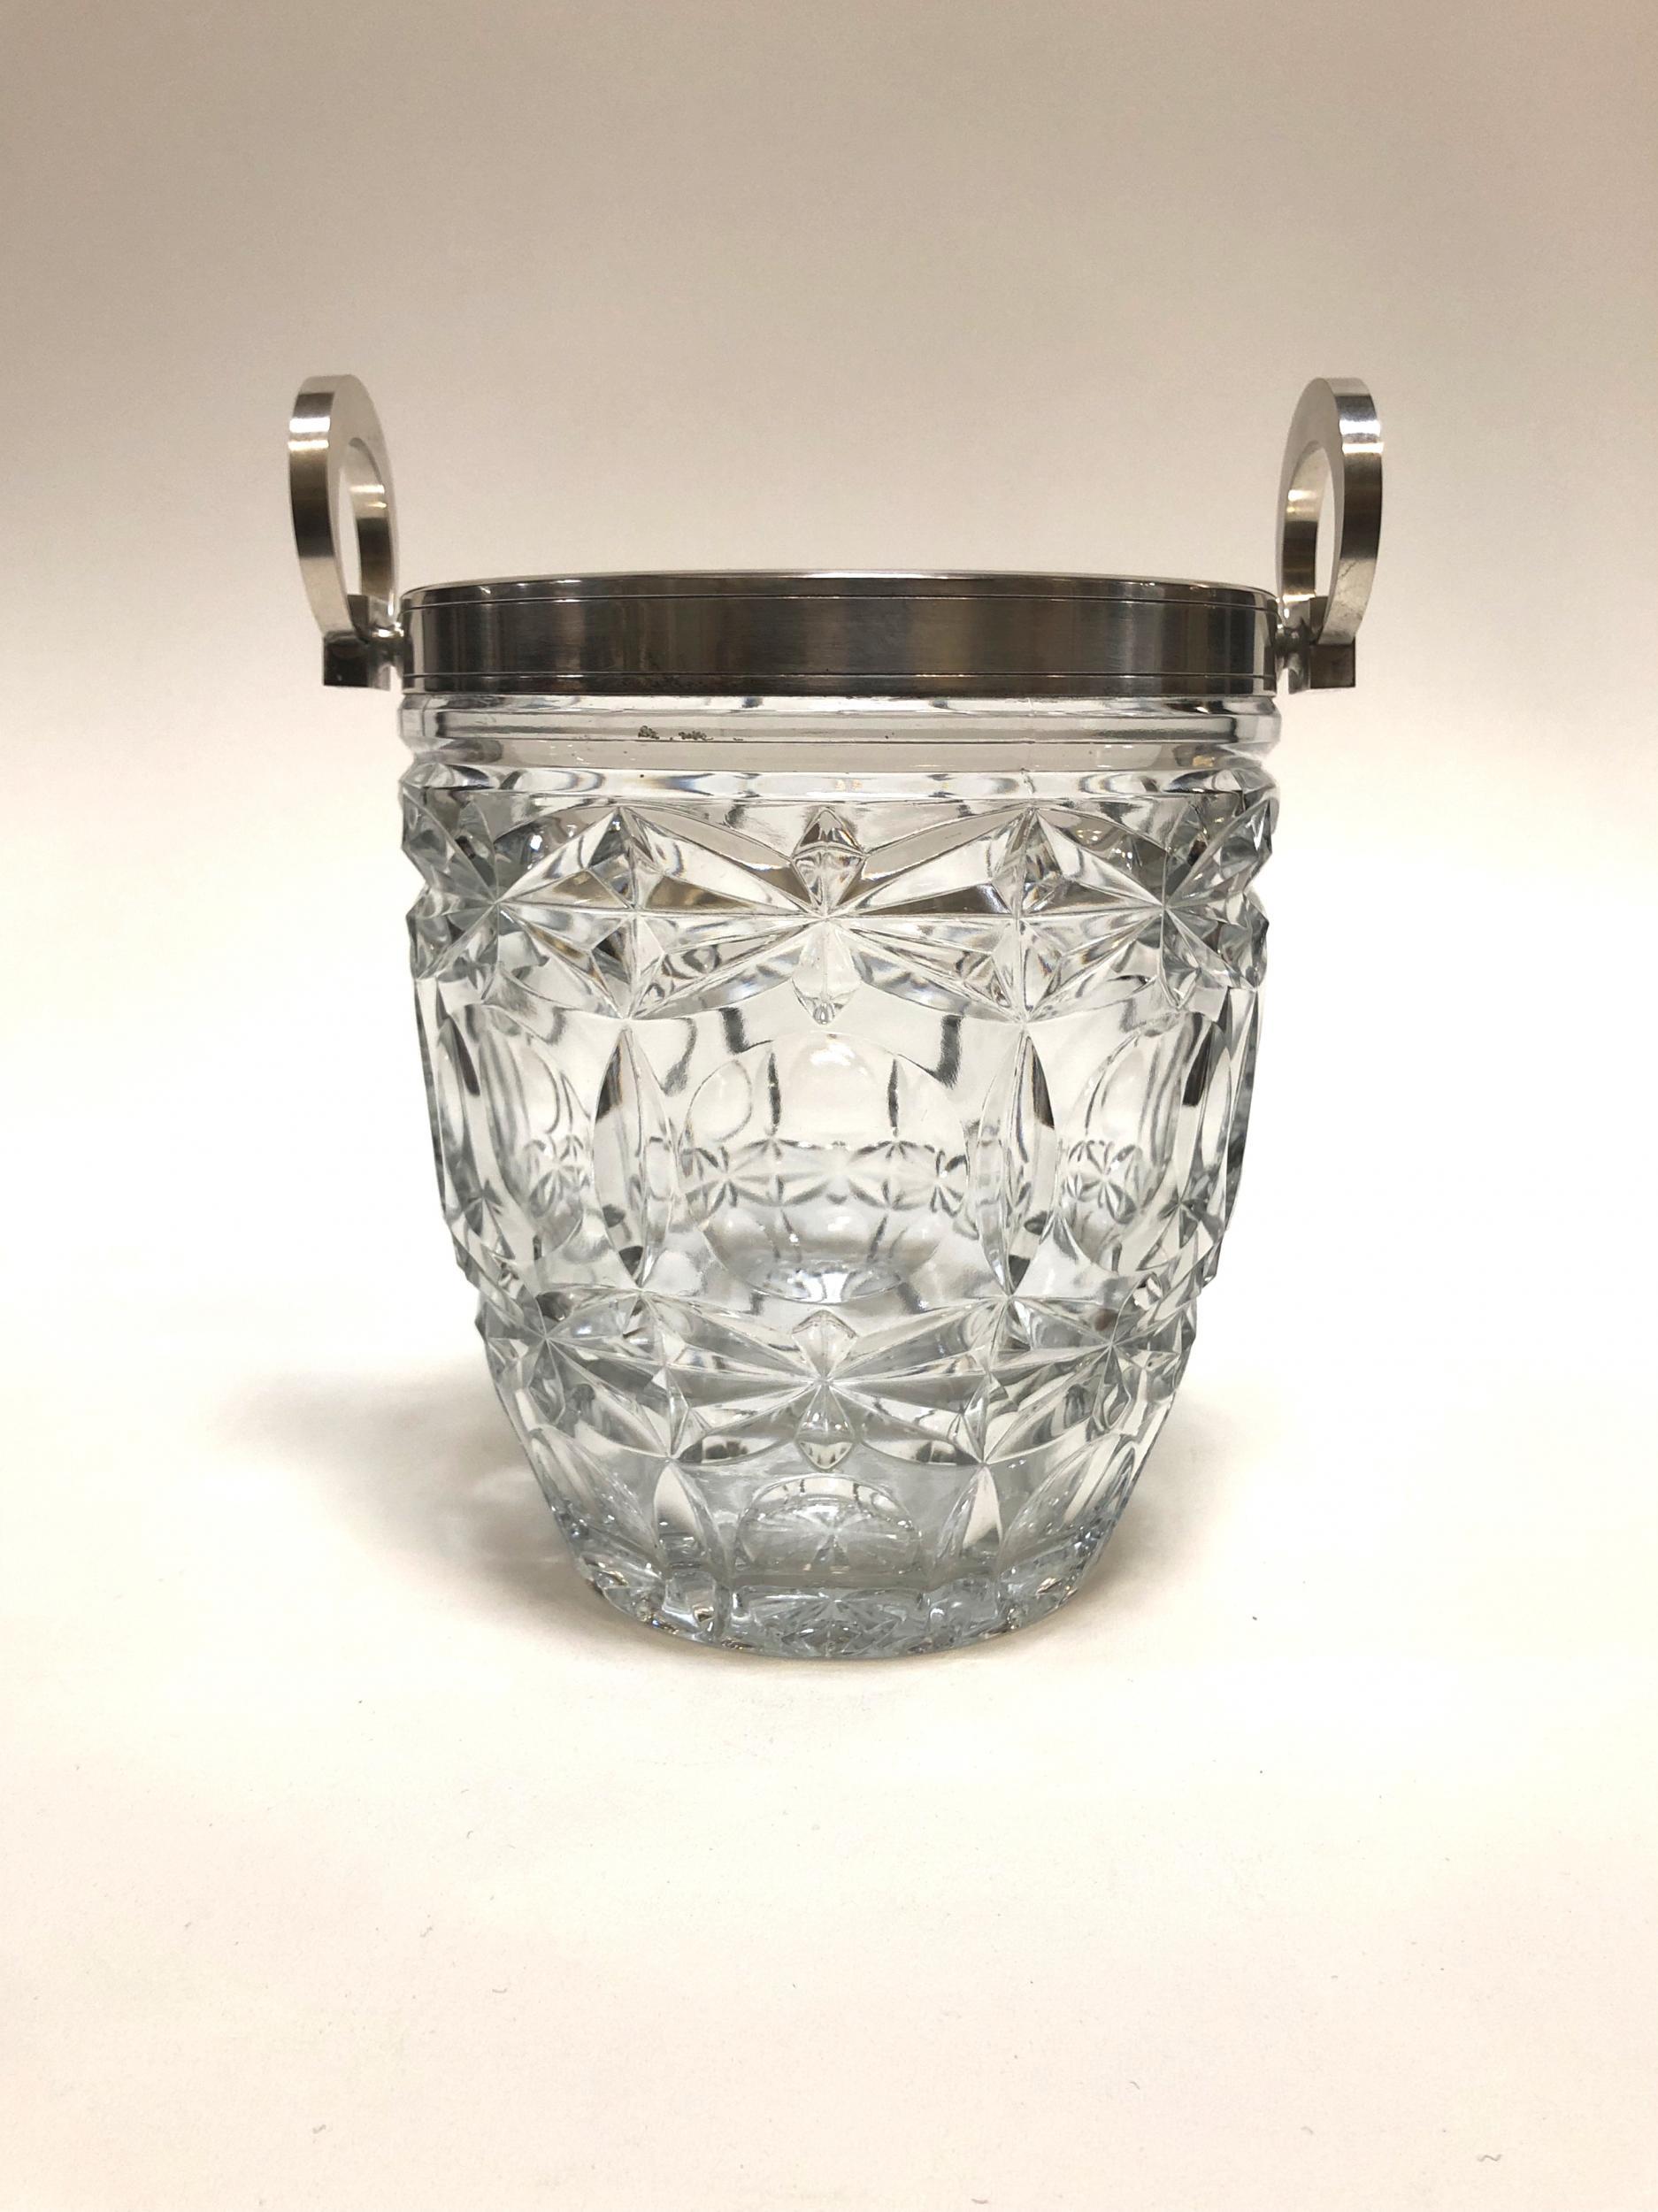 This is an intricately carved mid century crystal ice bucket with silver trim and handles that originated in France in the 1950s and was manufactured by E.L. as shown etched on the handle. 

Champagne never looked so glamourous in this beautiful